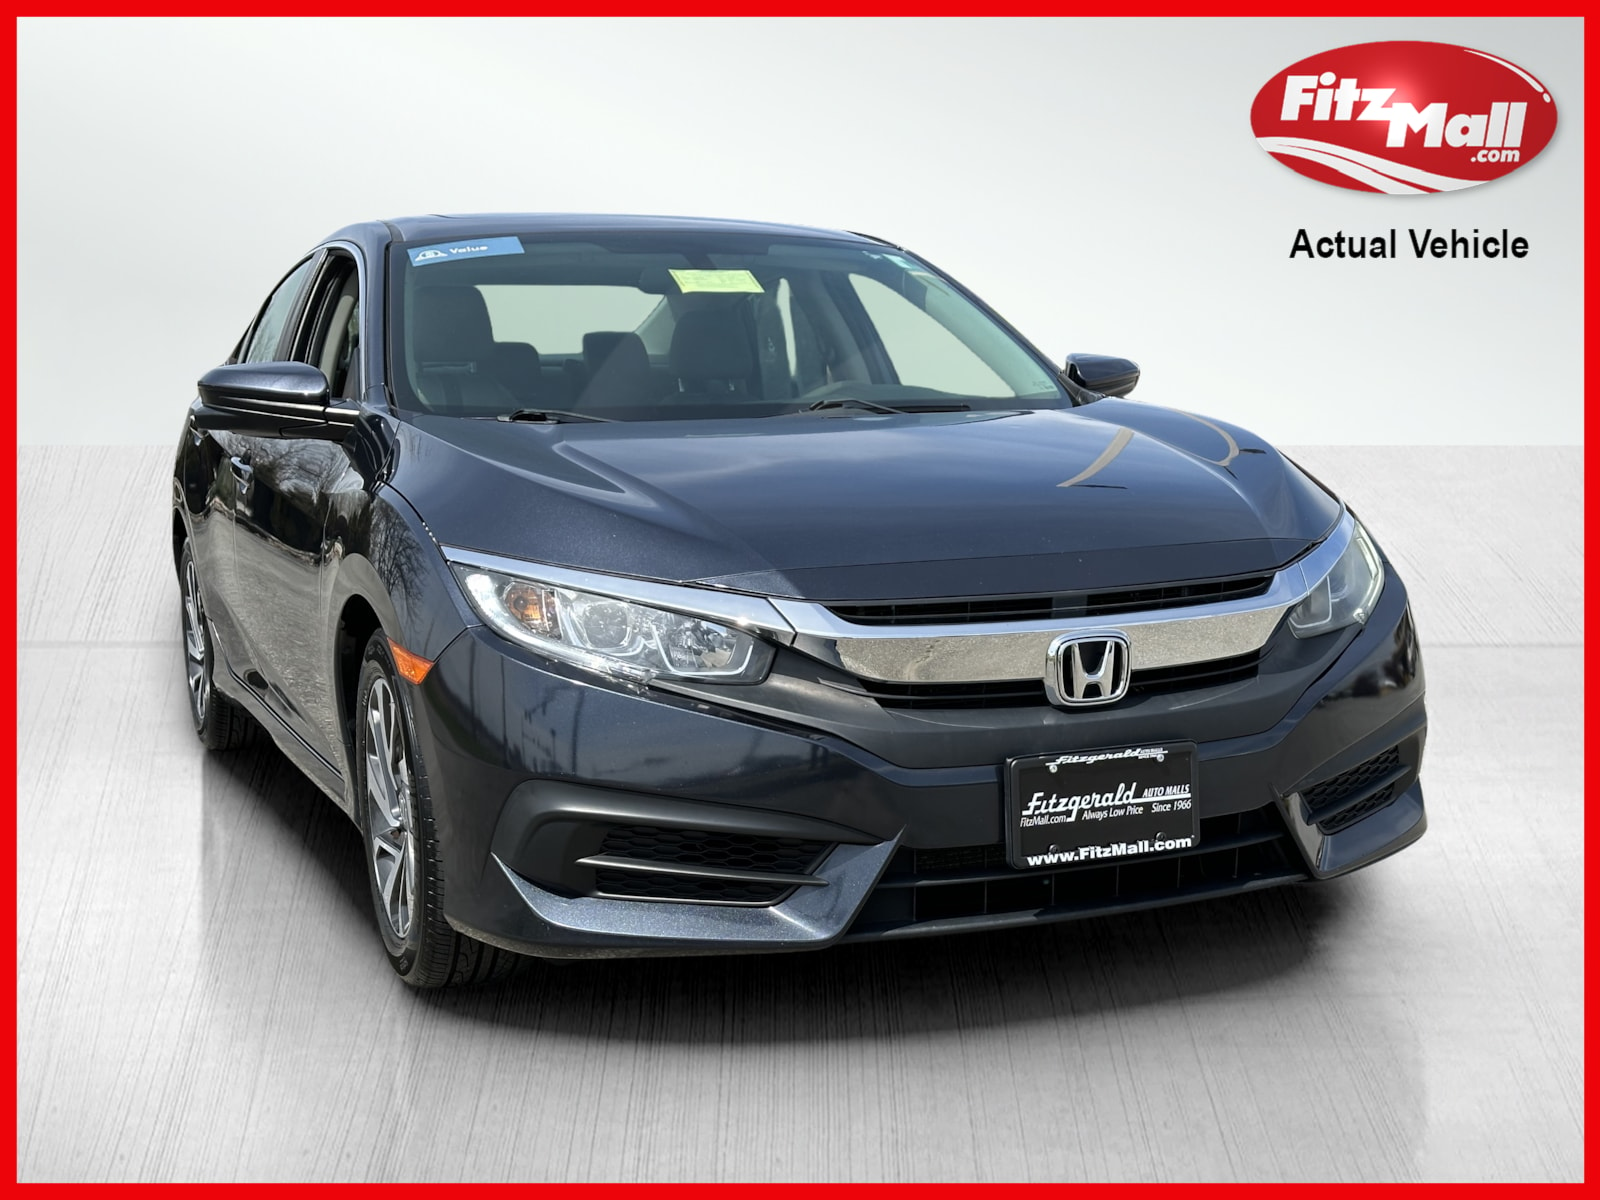 2016 Honda Civic Hagerstown MD